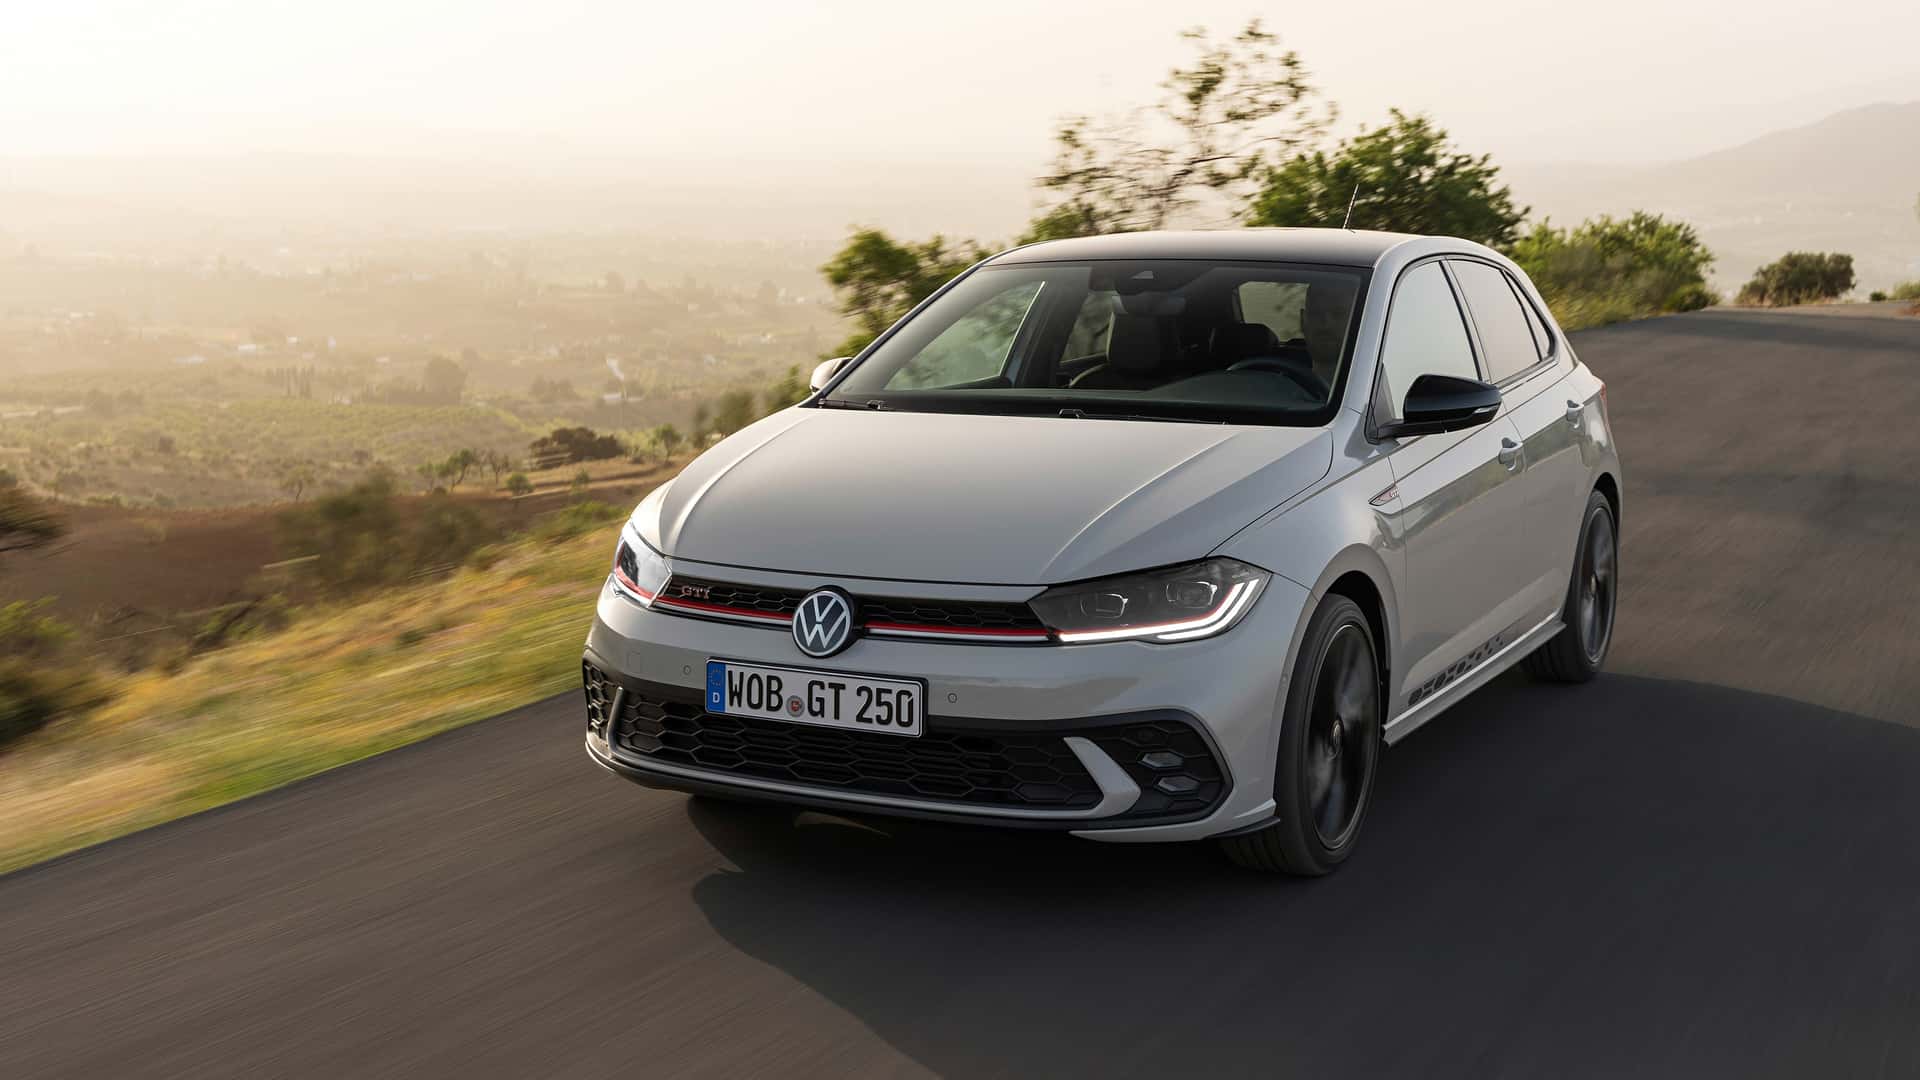 Volkswagen Polo GTI Edition 25 Revealed, Could Be The Last Update